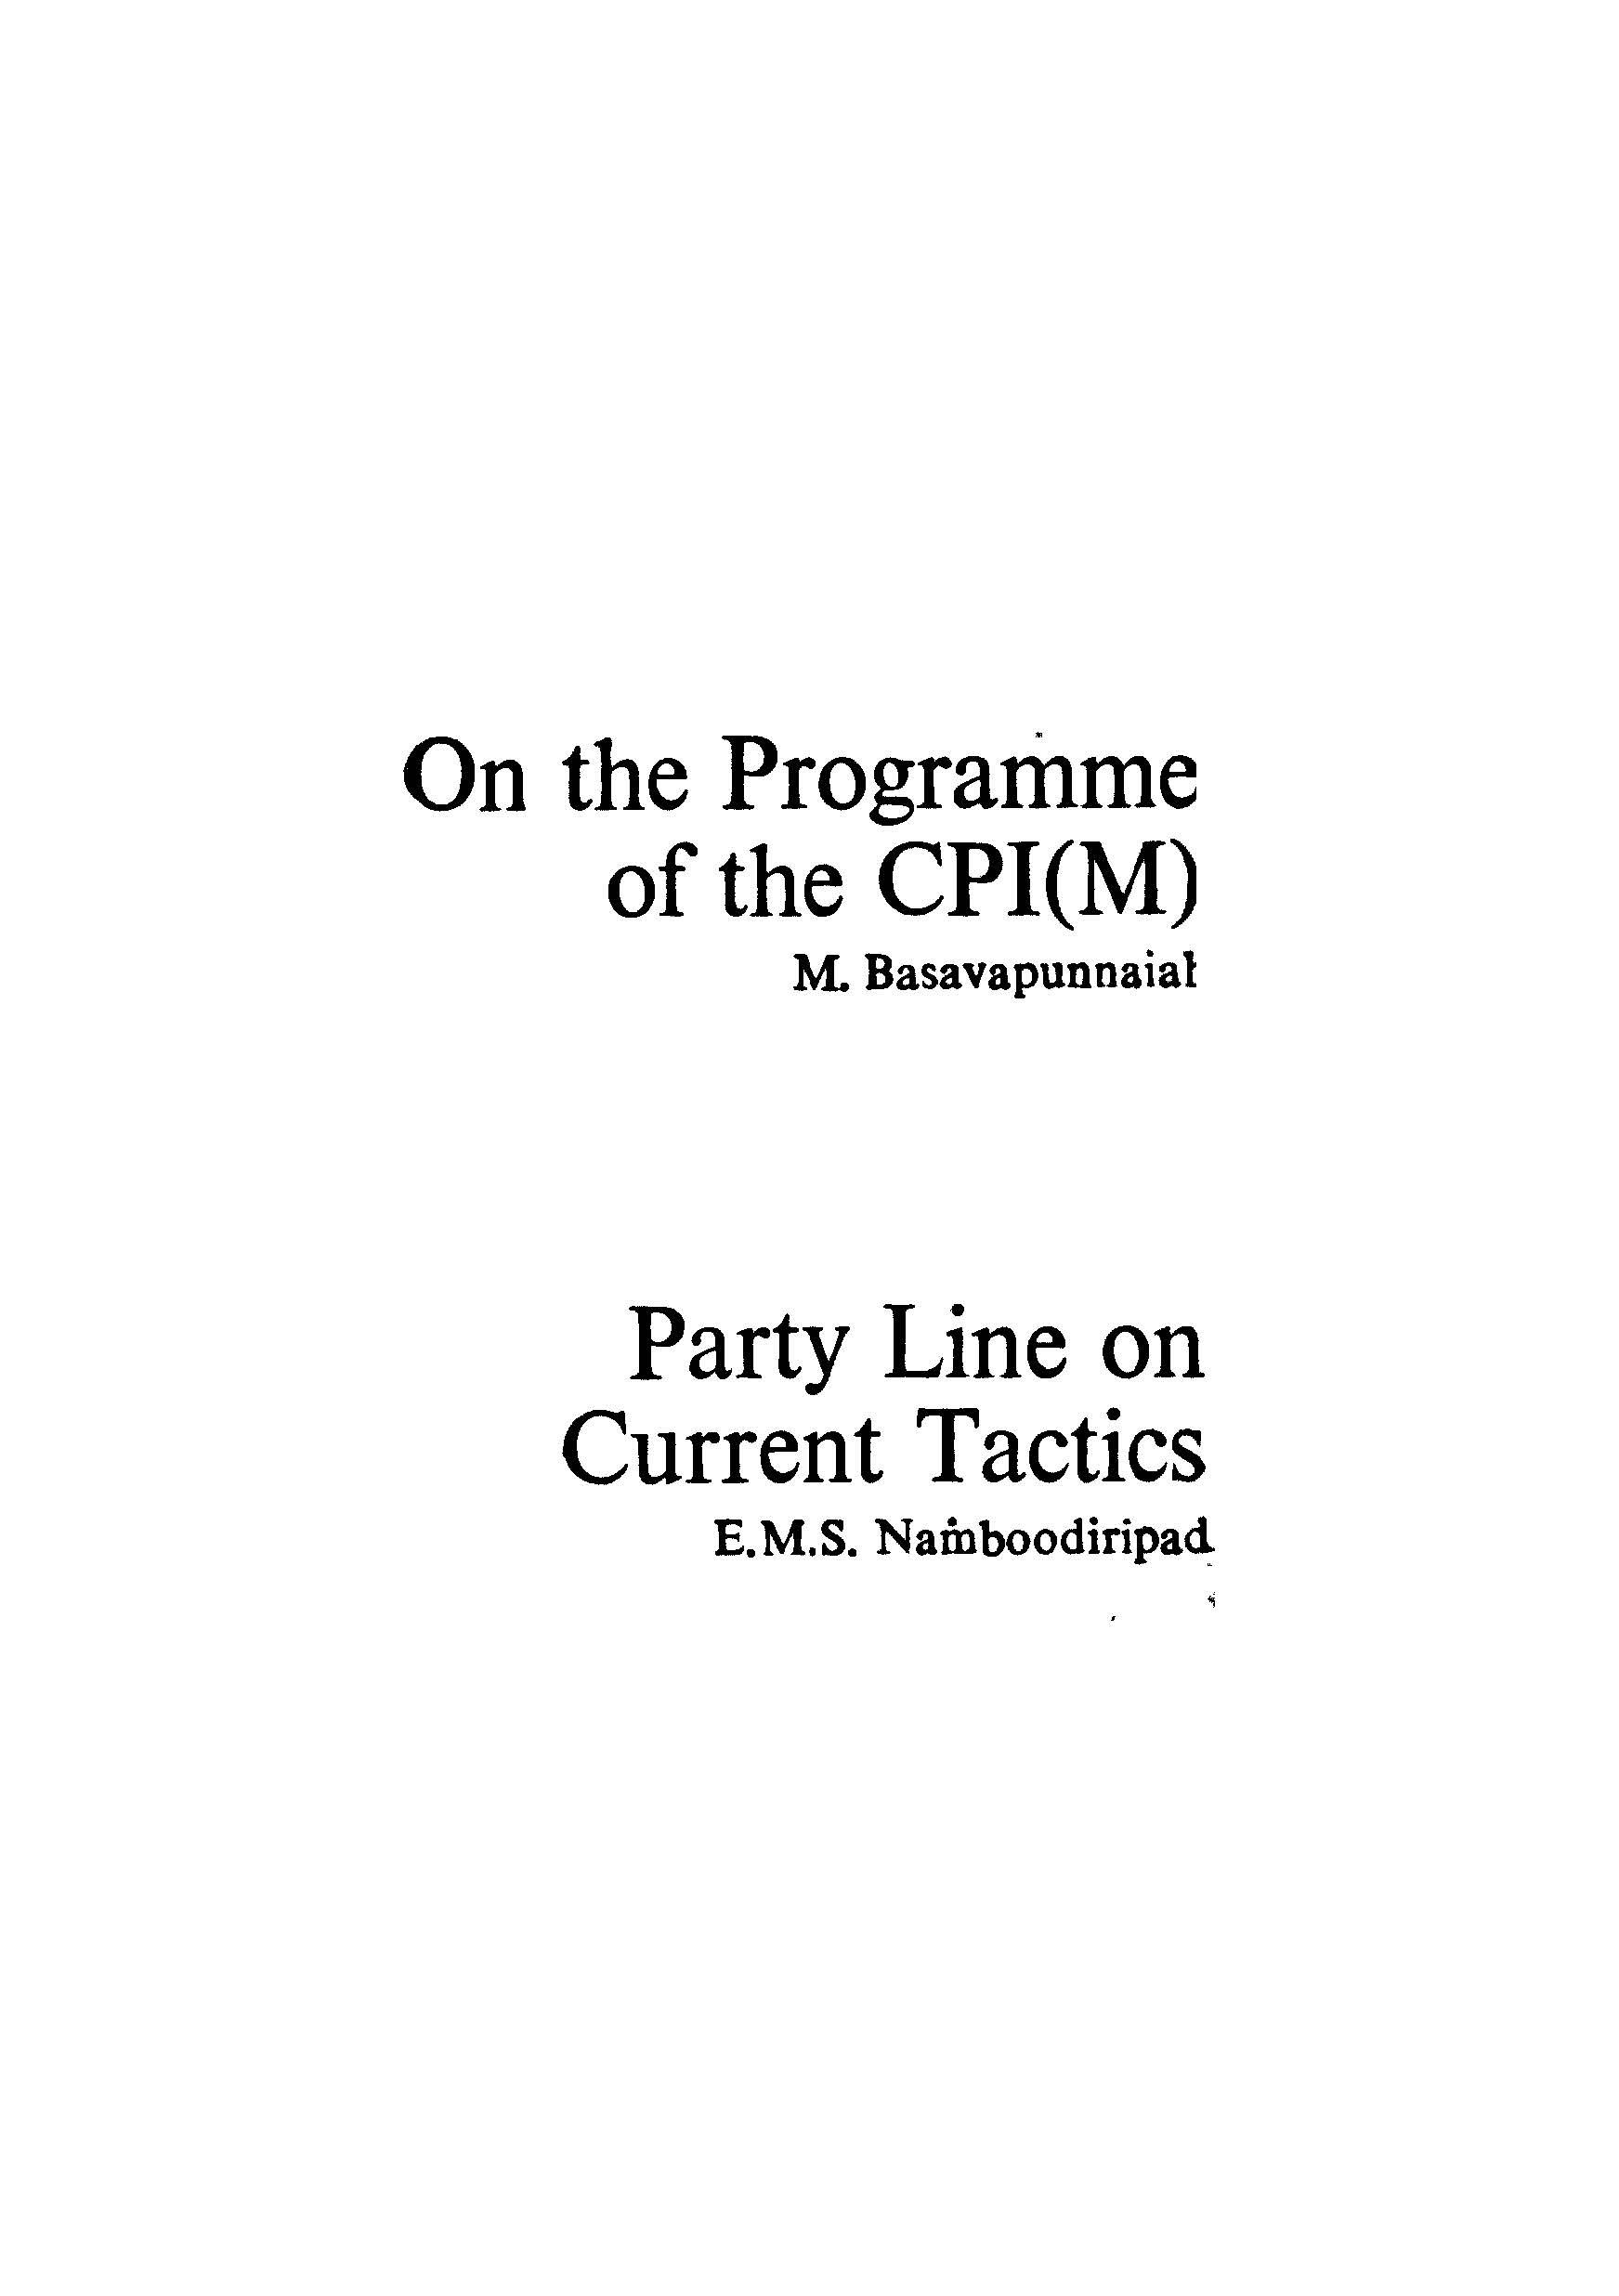 On The Programme Of The CPI(M)